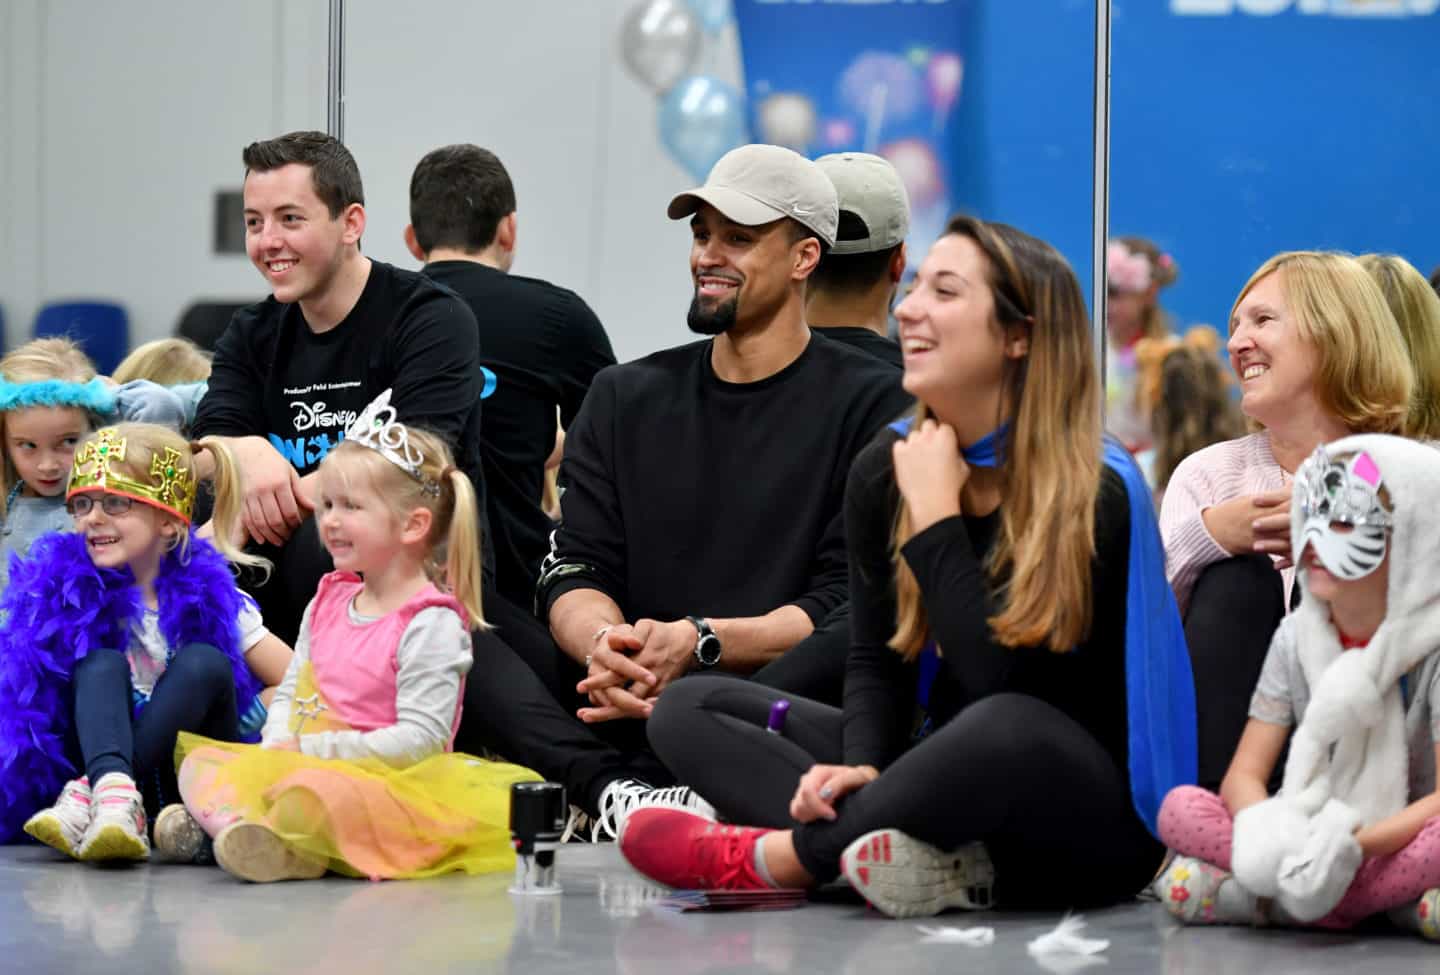 Disney On Ice. Birmingham. 3rd September 2017. Ahead of Disney On Ice coming to Birmingham on the 18th October Ashley Banjo hosts a dance workshop as part of the Fit to Dance programme Picture by Simon Hadley. www.simonhadley.co.uk